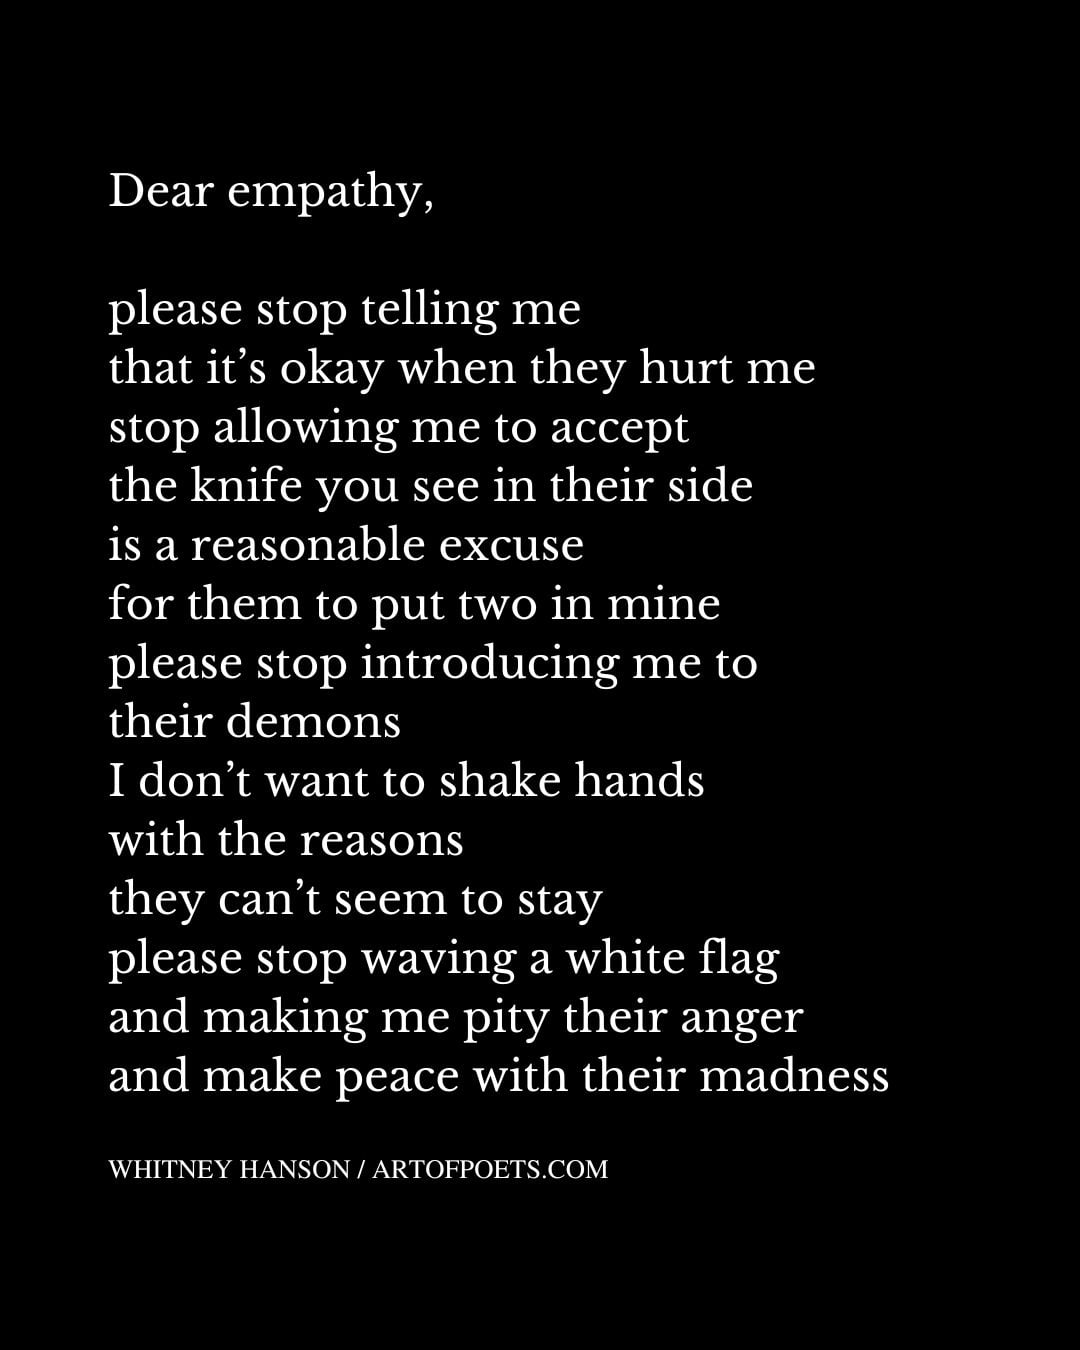 Dear empathy please stop telling me that its okay when they hurt me stop allowing me to accept the knife you see in their side is a reasonable excuse for them to put two in mine